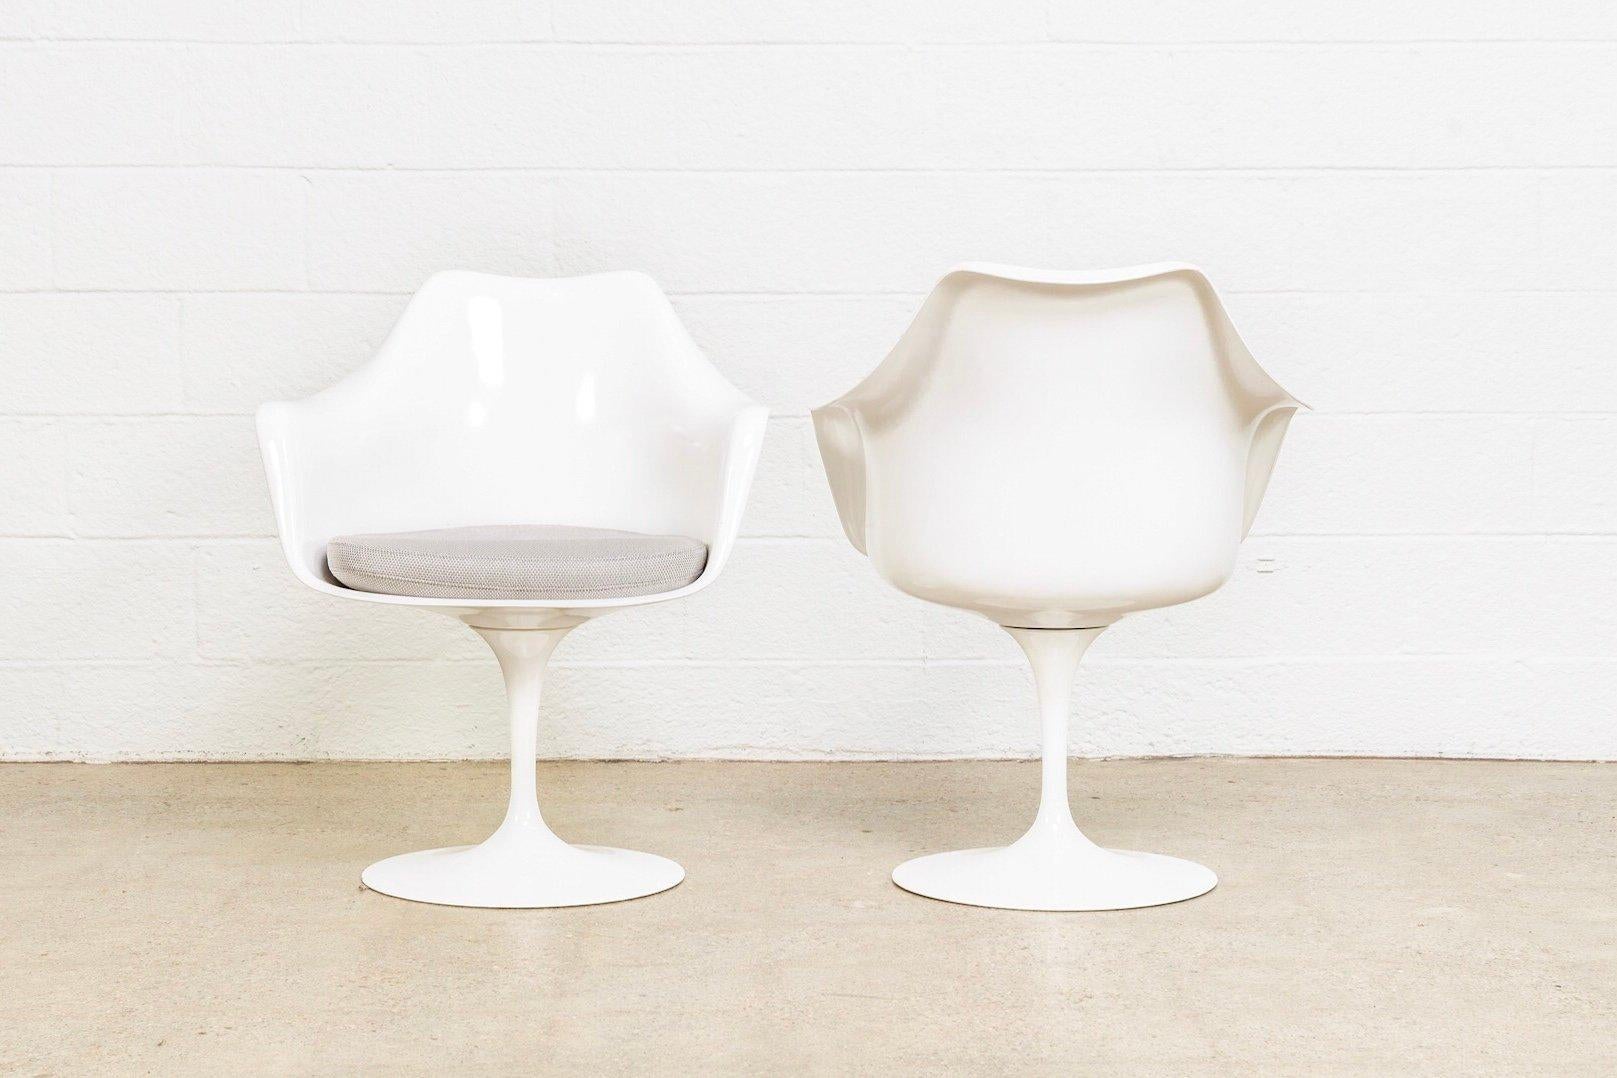 Late 20th Century Eero Saarinen for Knoll White Tulip Arm Chairs, Gray Knoll Cushions, Set of 4